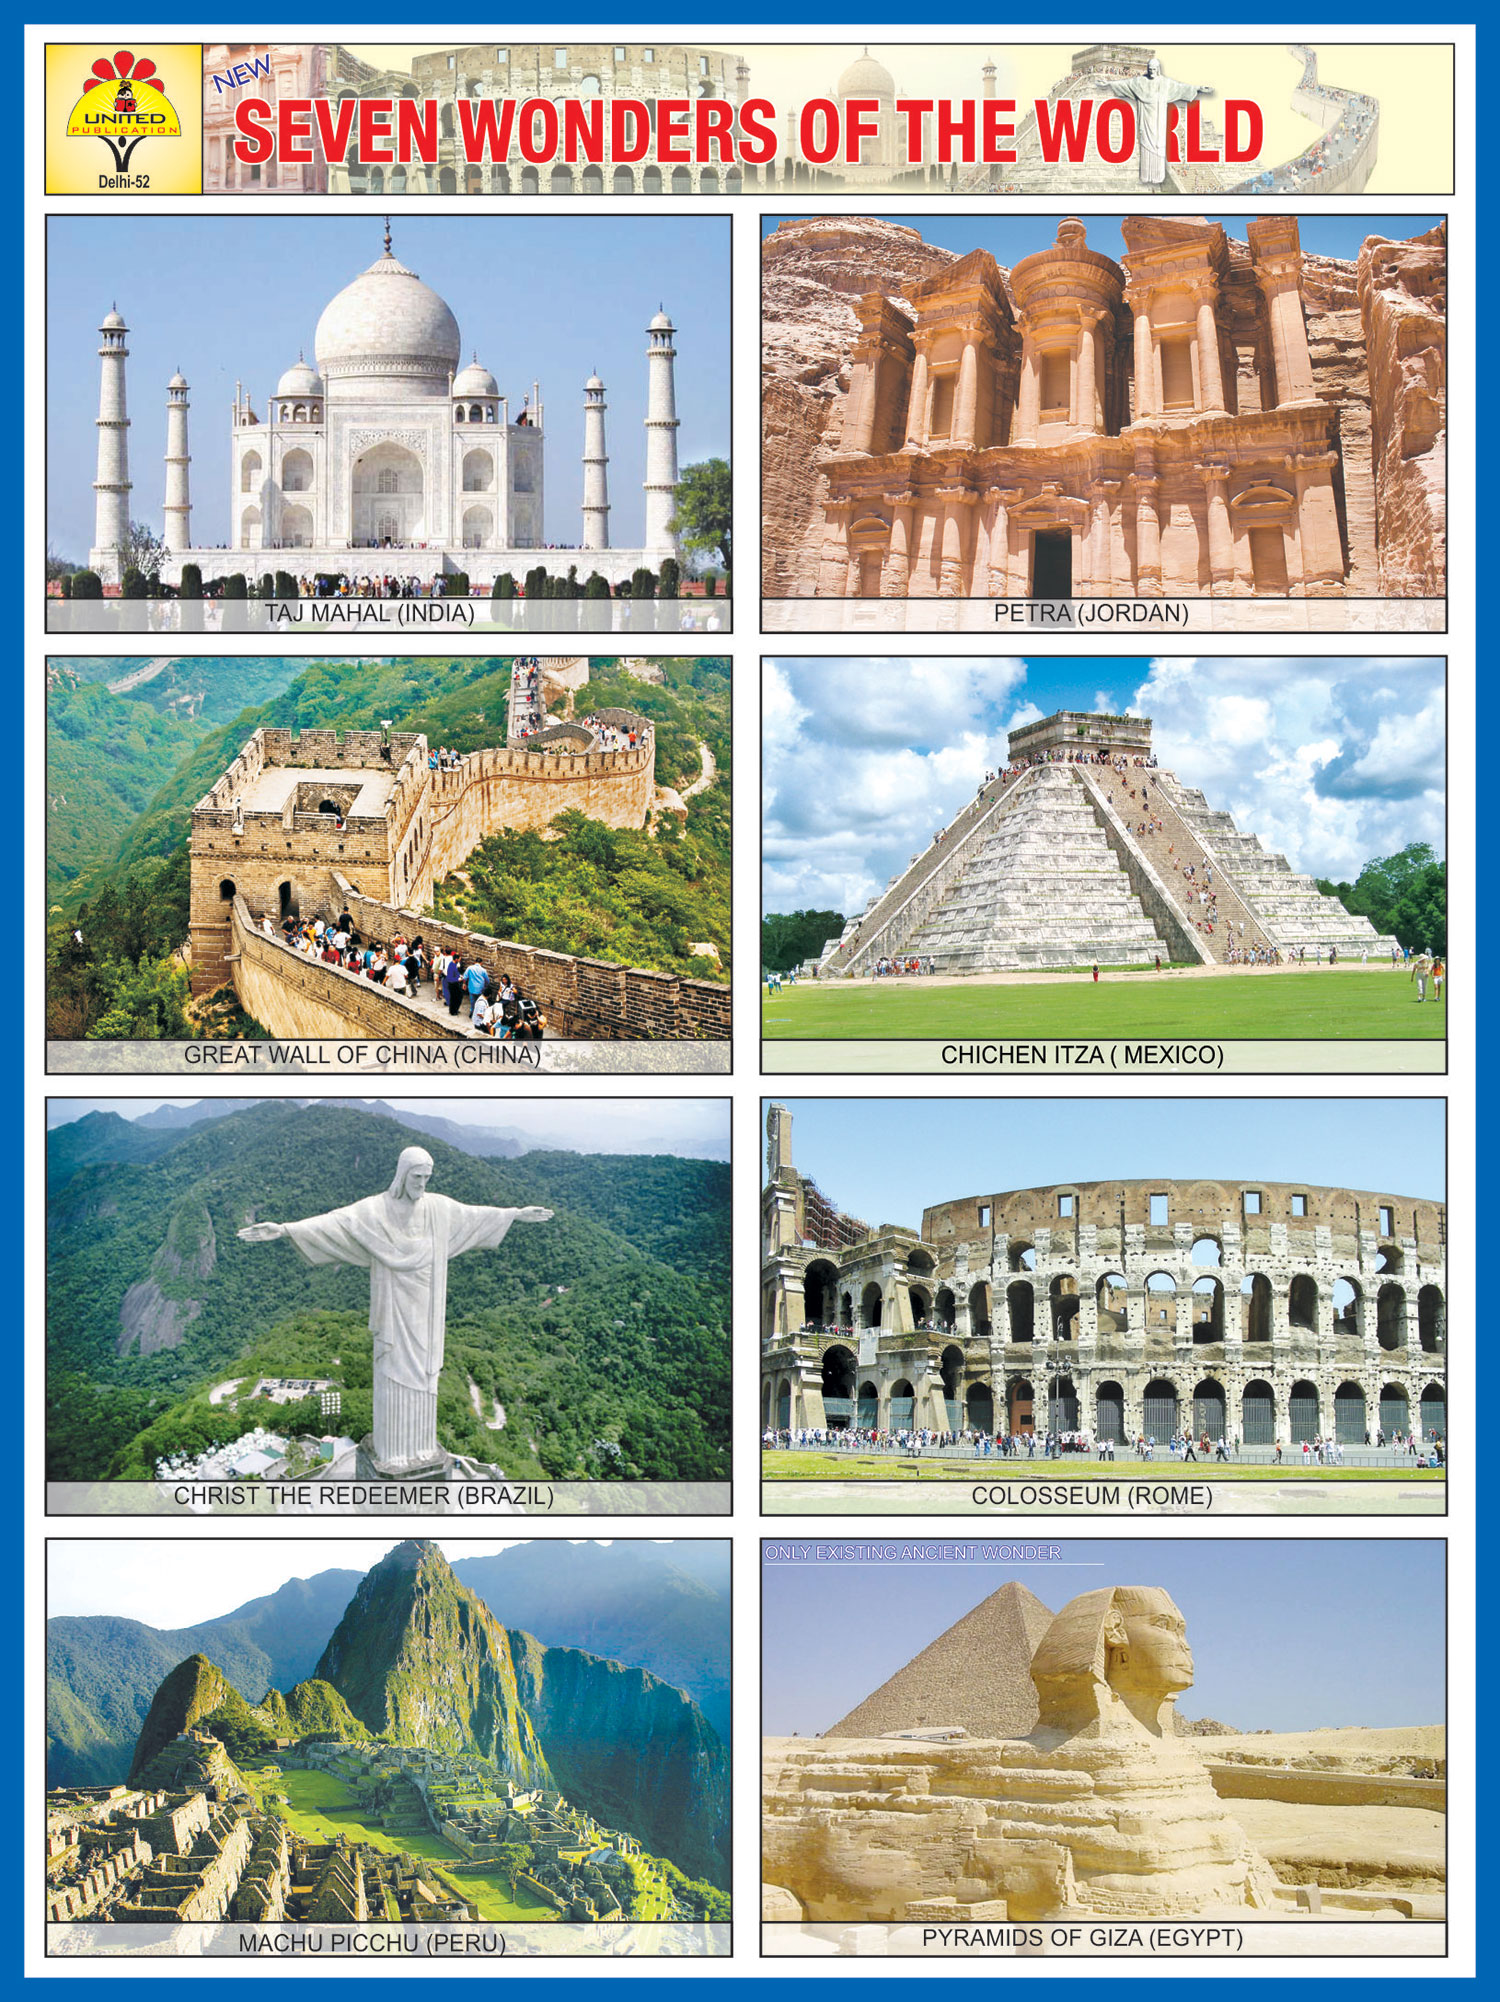 Seven wonders of the world are. The Seven Wonders of the World names]. 7 Wonders of the World. New Seven Wonders of the World. 7 Wonders of the World old.